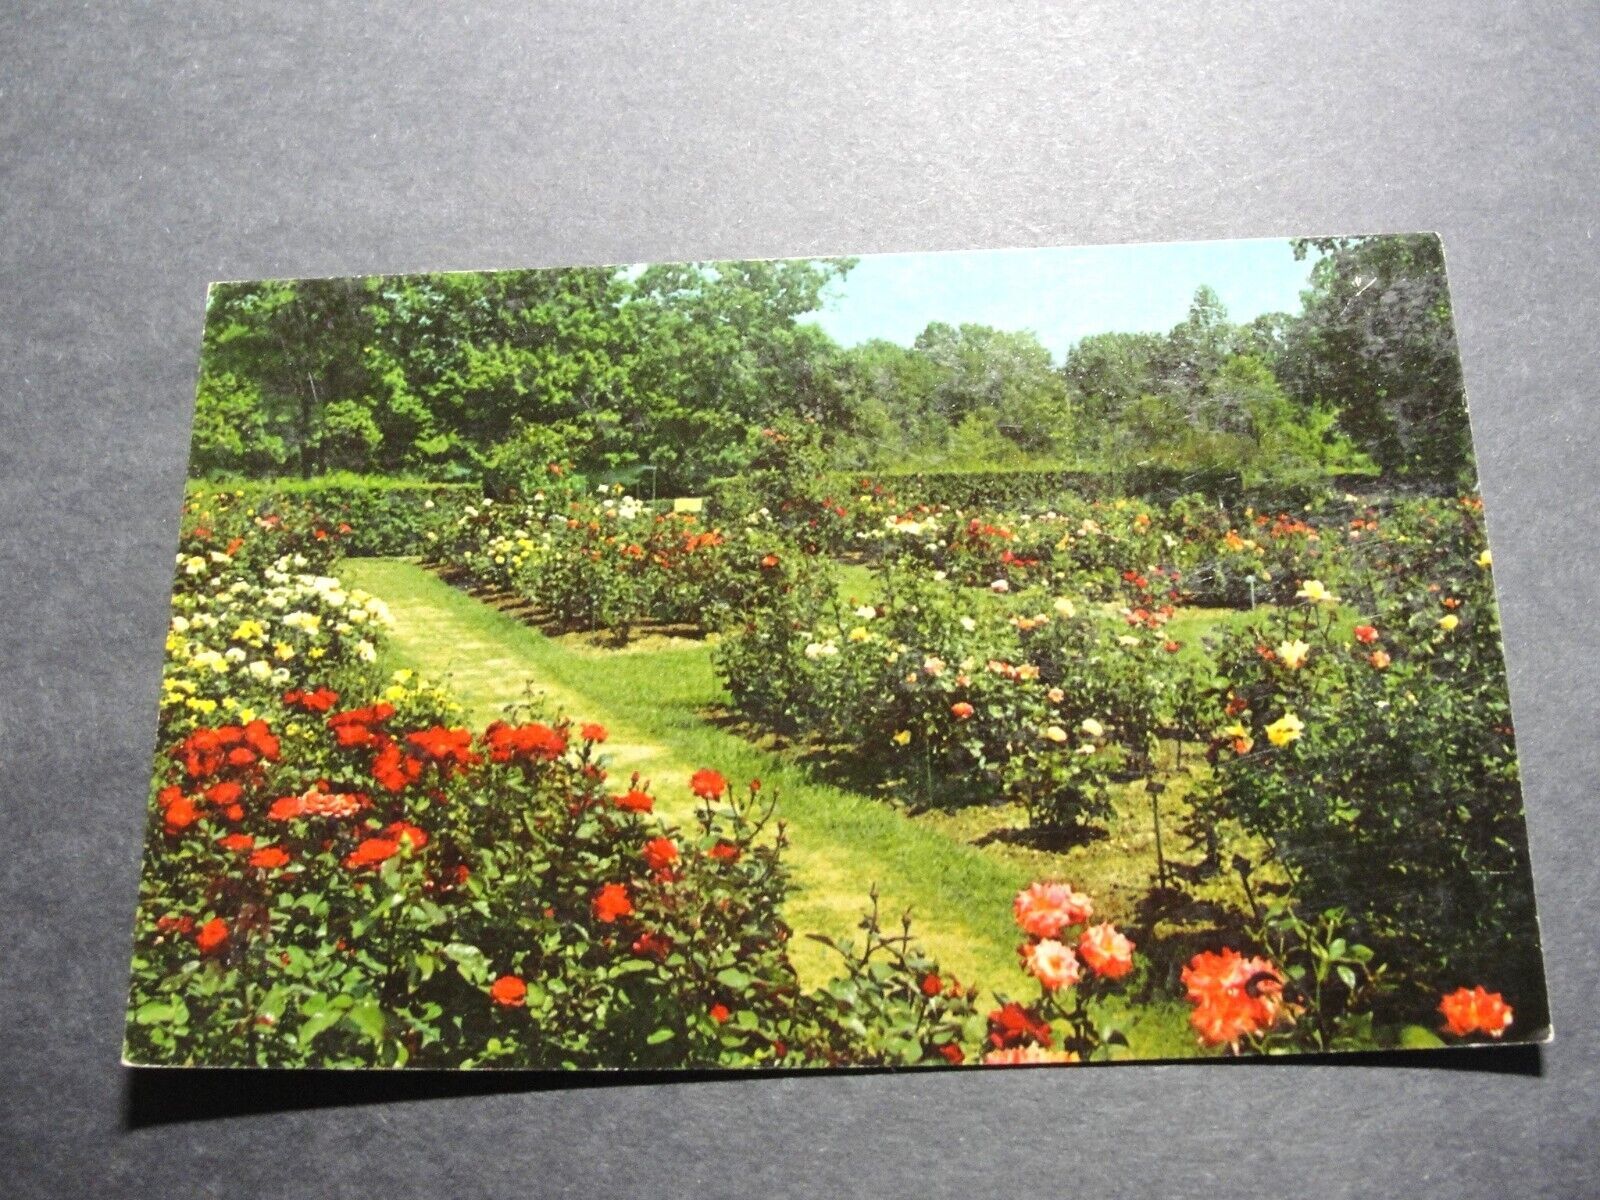 Primary image for Kingwood Center, Mansfield, Ohio- Rose Test Garden - 1960s Unposted Postcard.